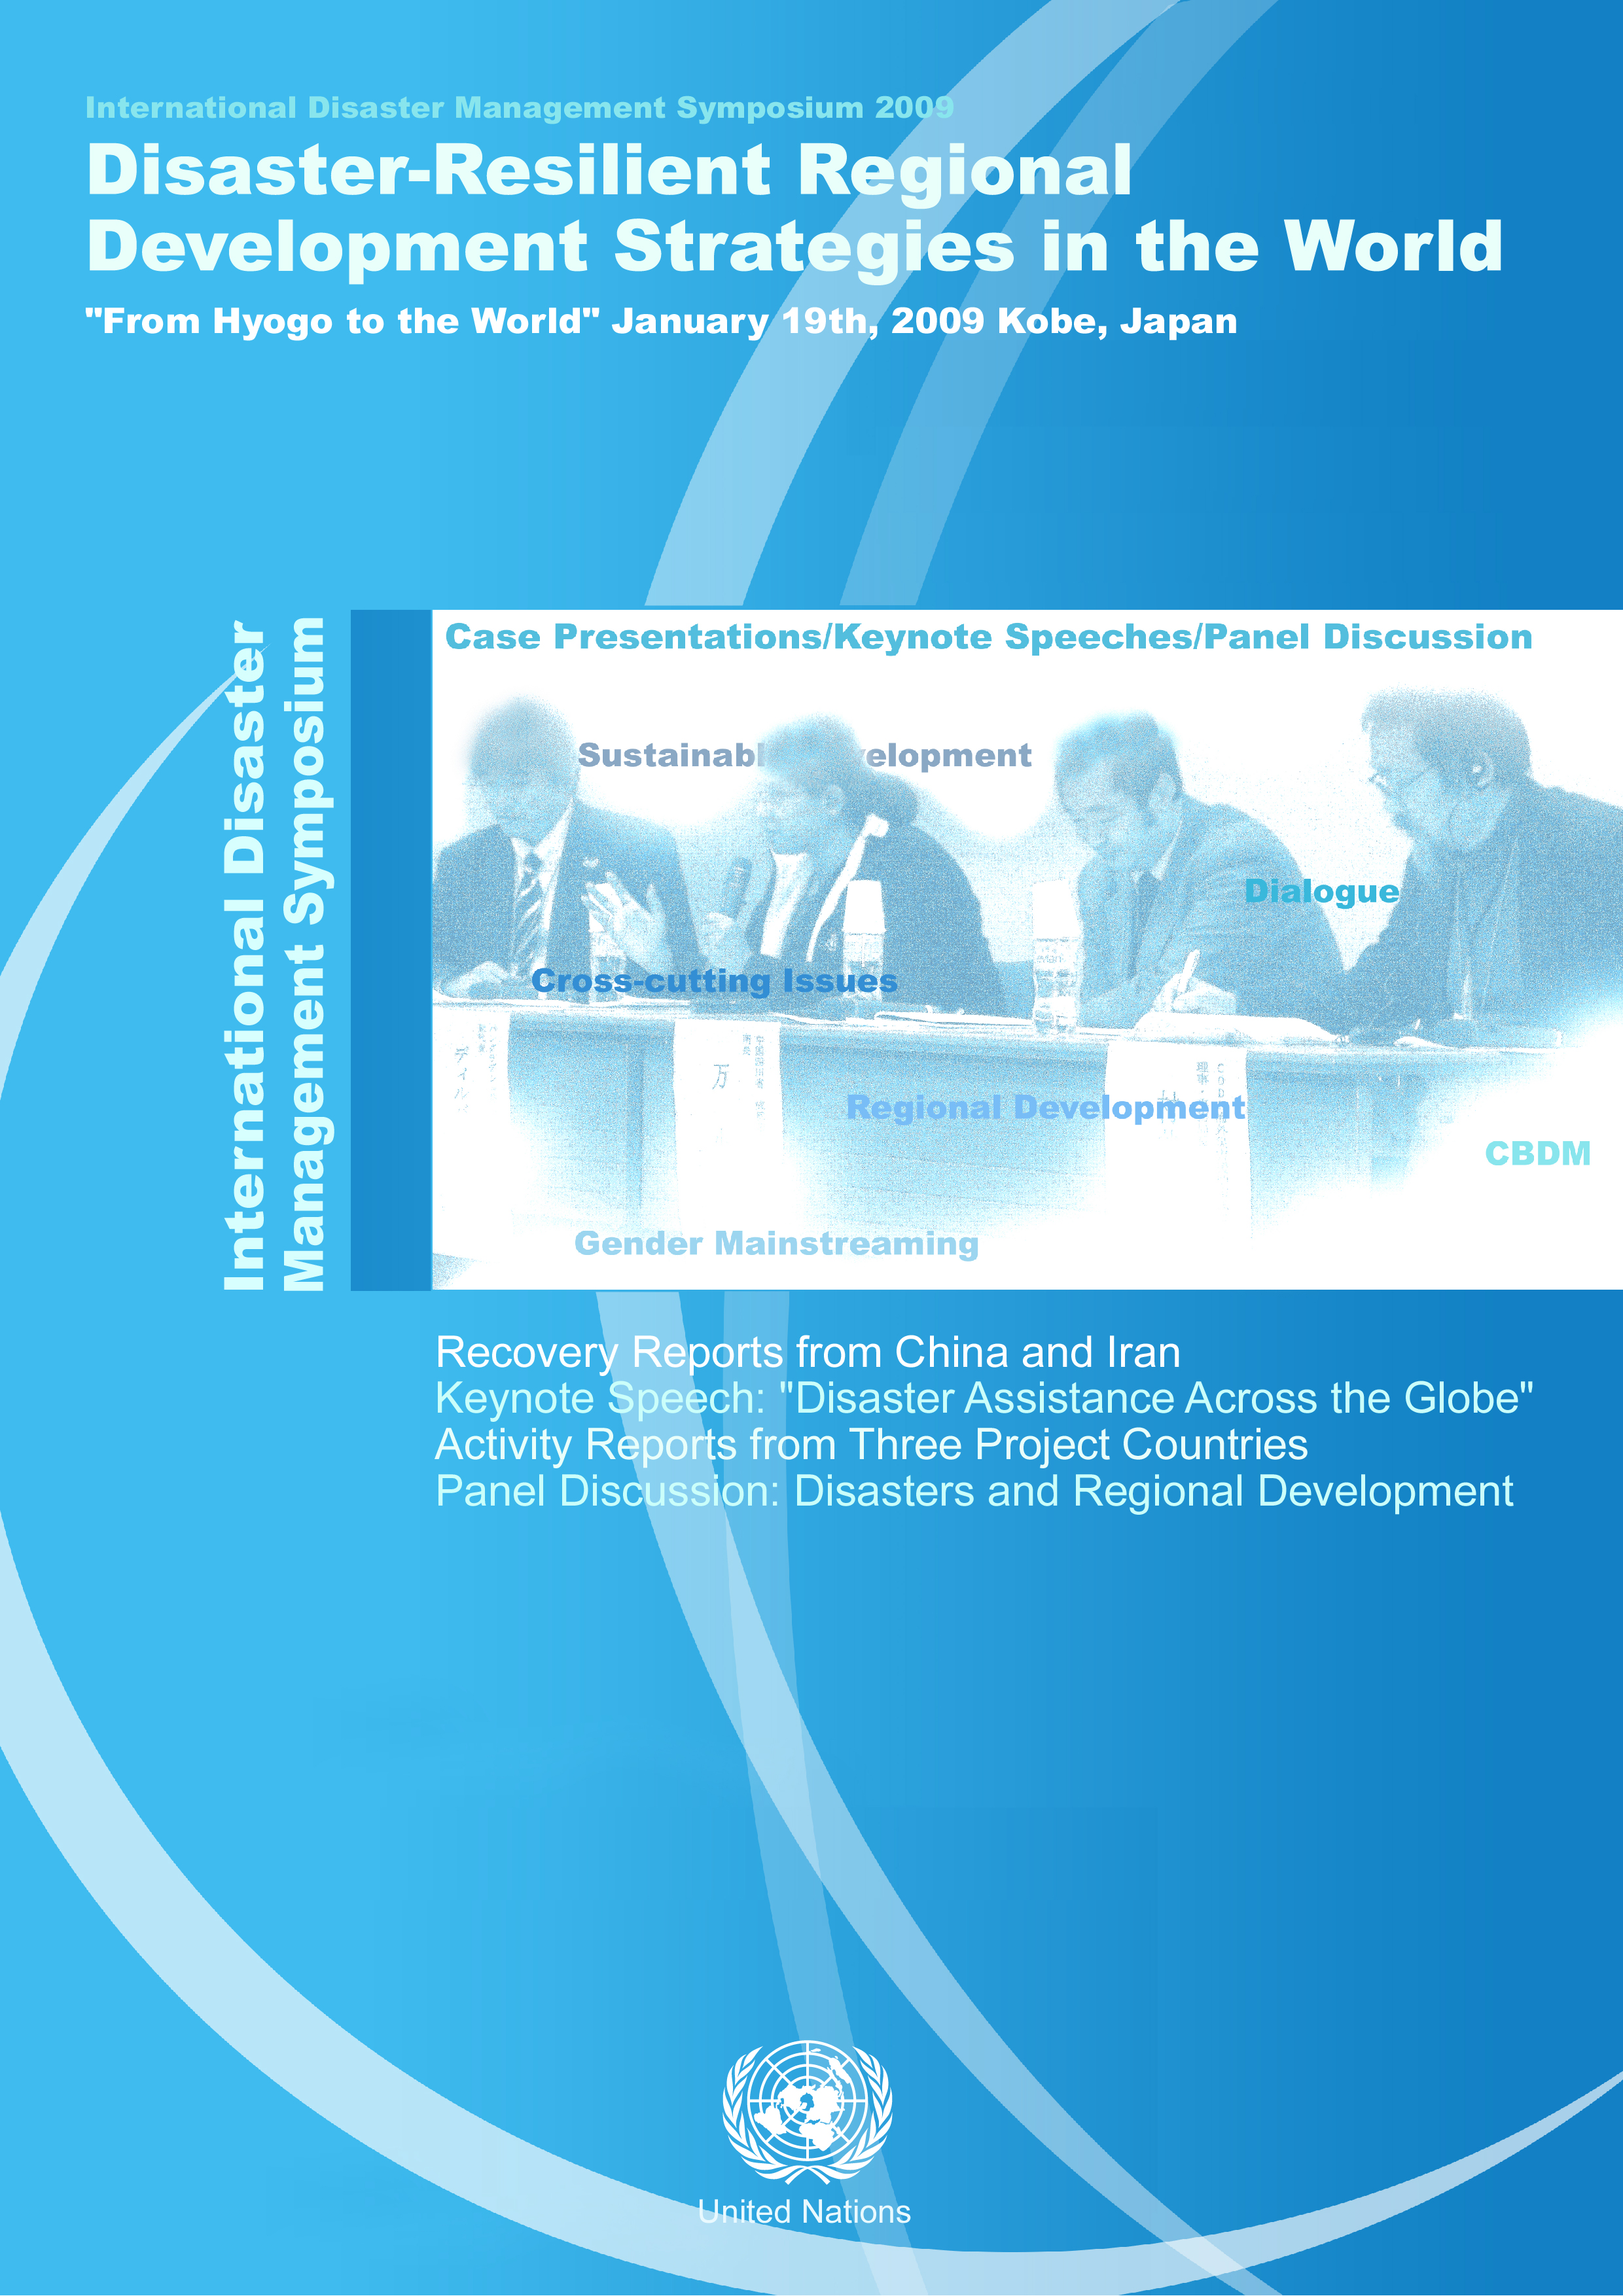 Cover of the summary of the International Disaster Management Symposium 2009